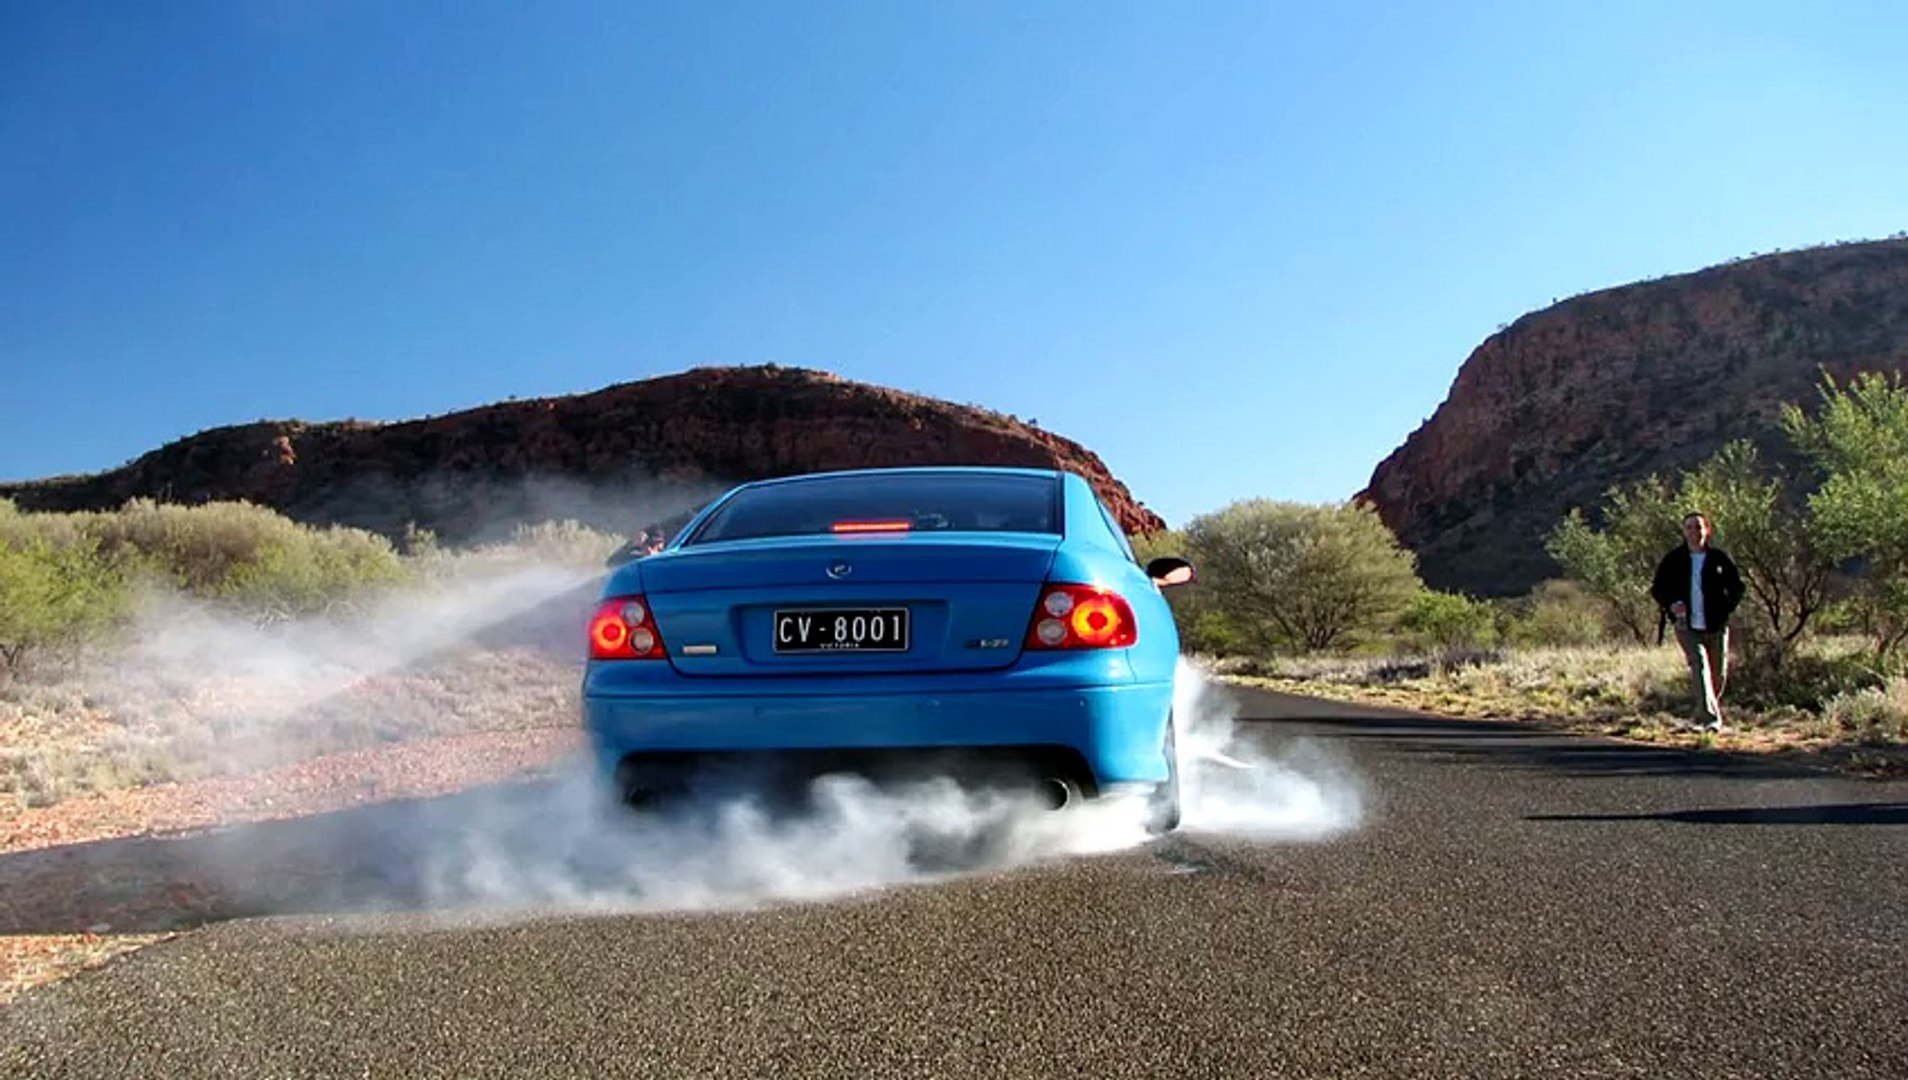 Tires Screeching Sound Effect - video Dailymotion